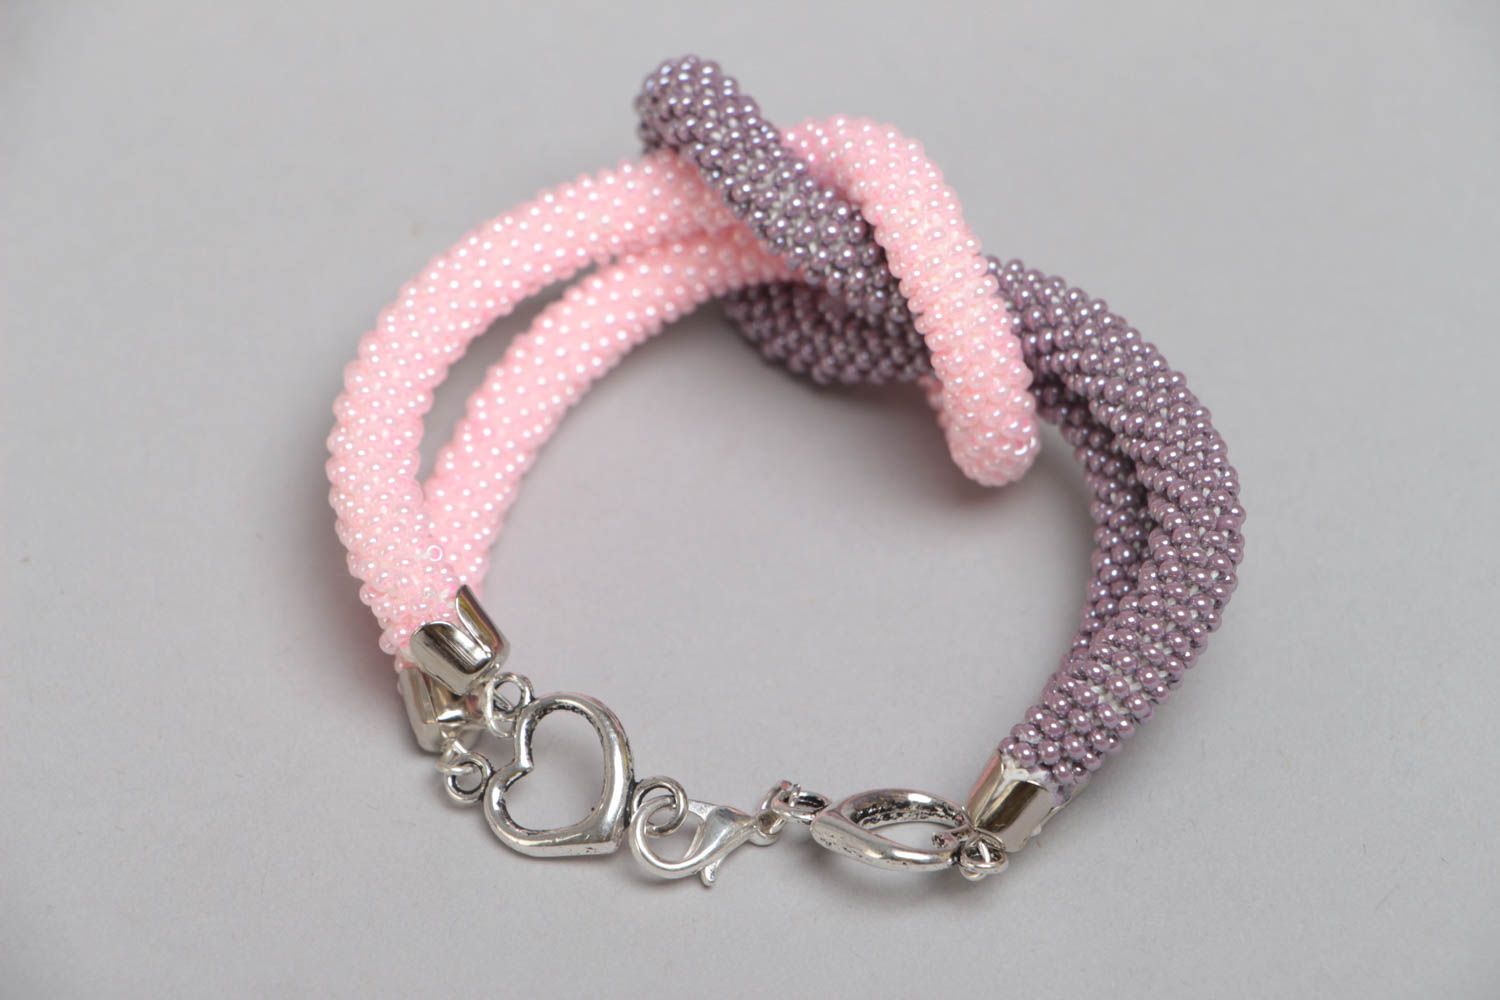 Handmade designer two colored gray and pink beaded cord wrist bracelet for women photo 4